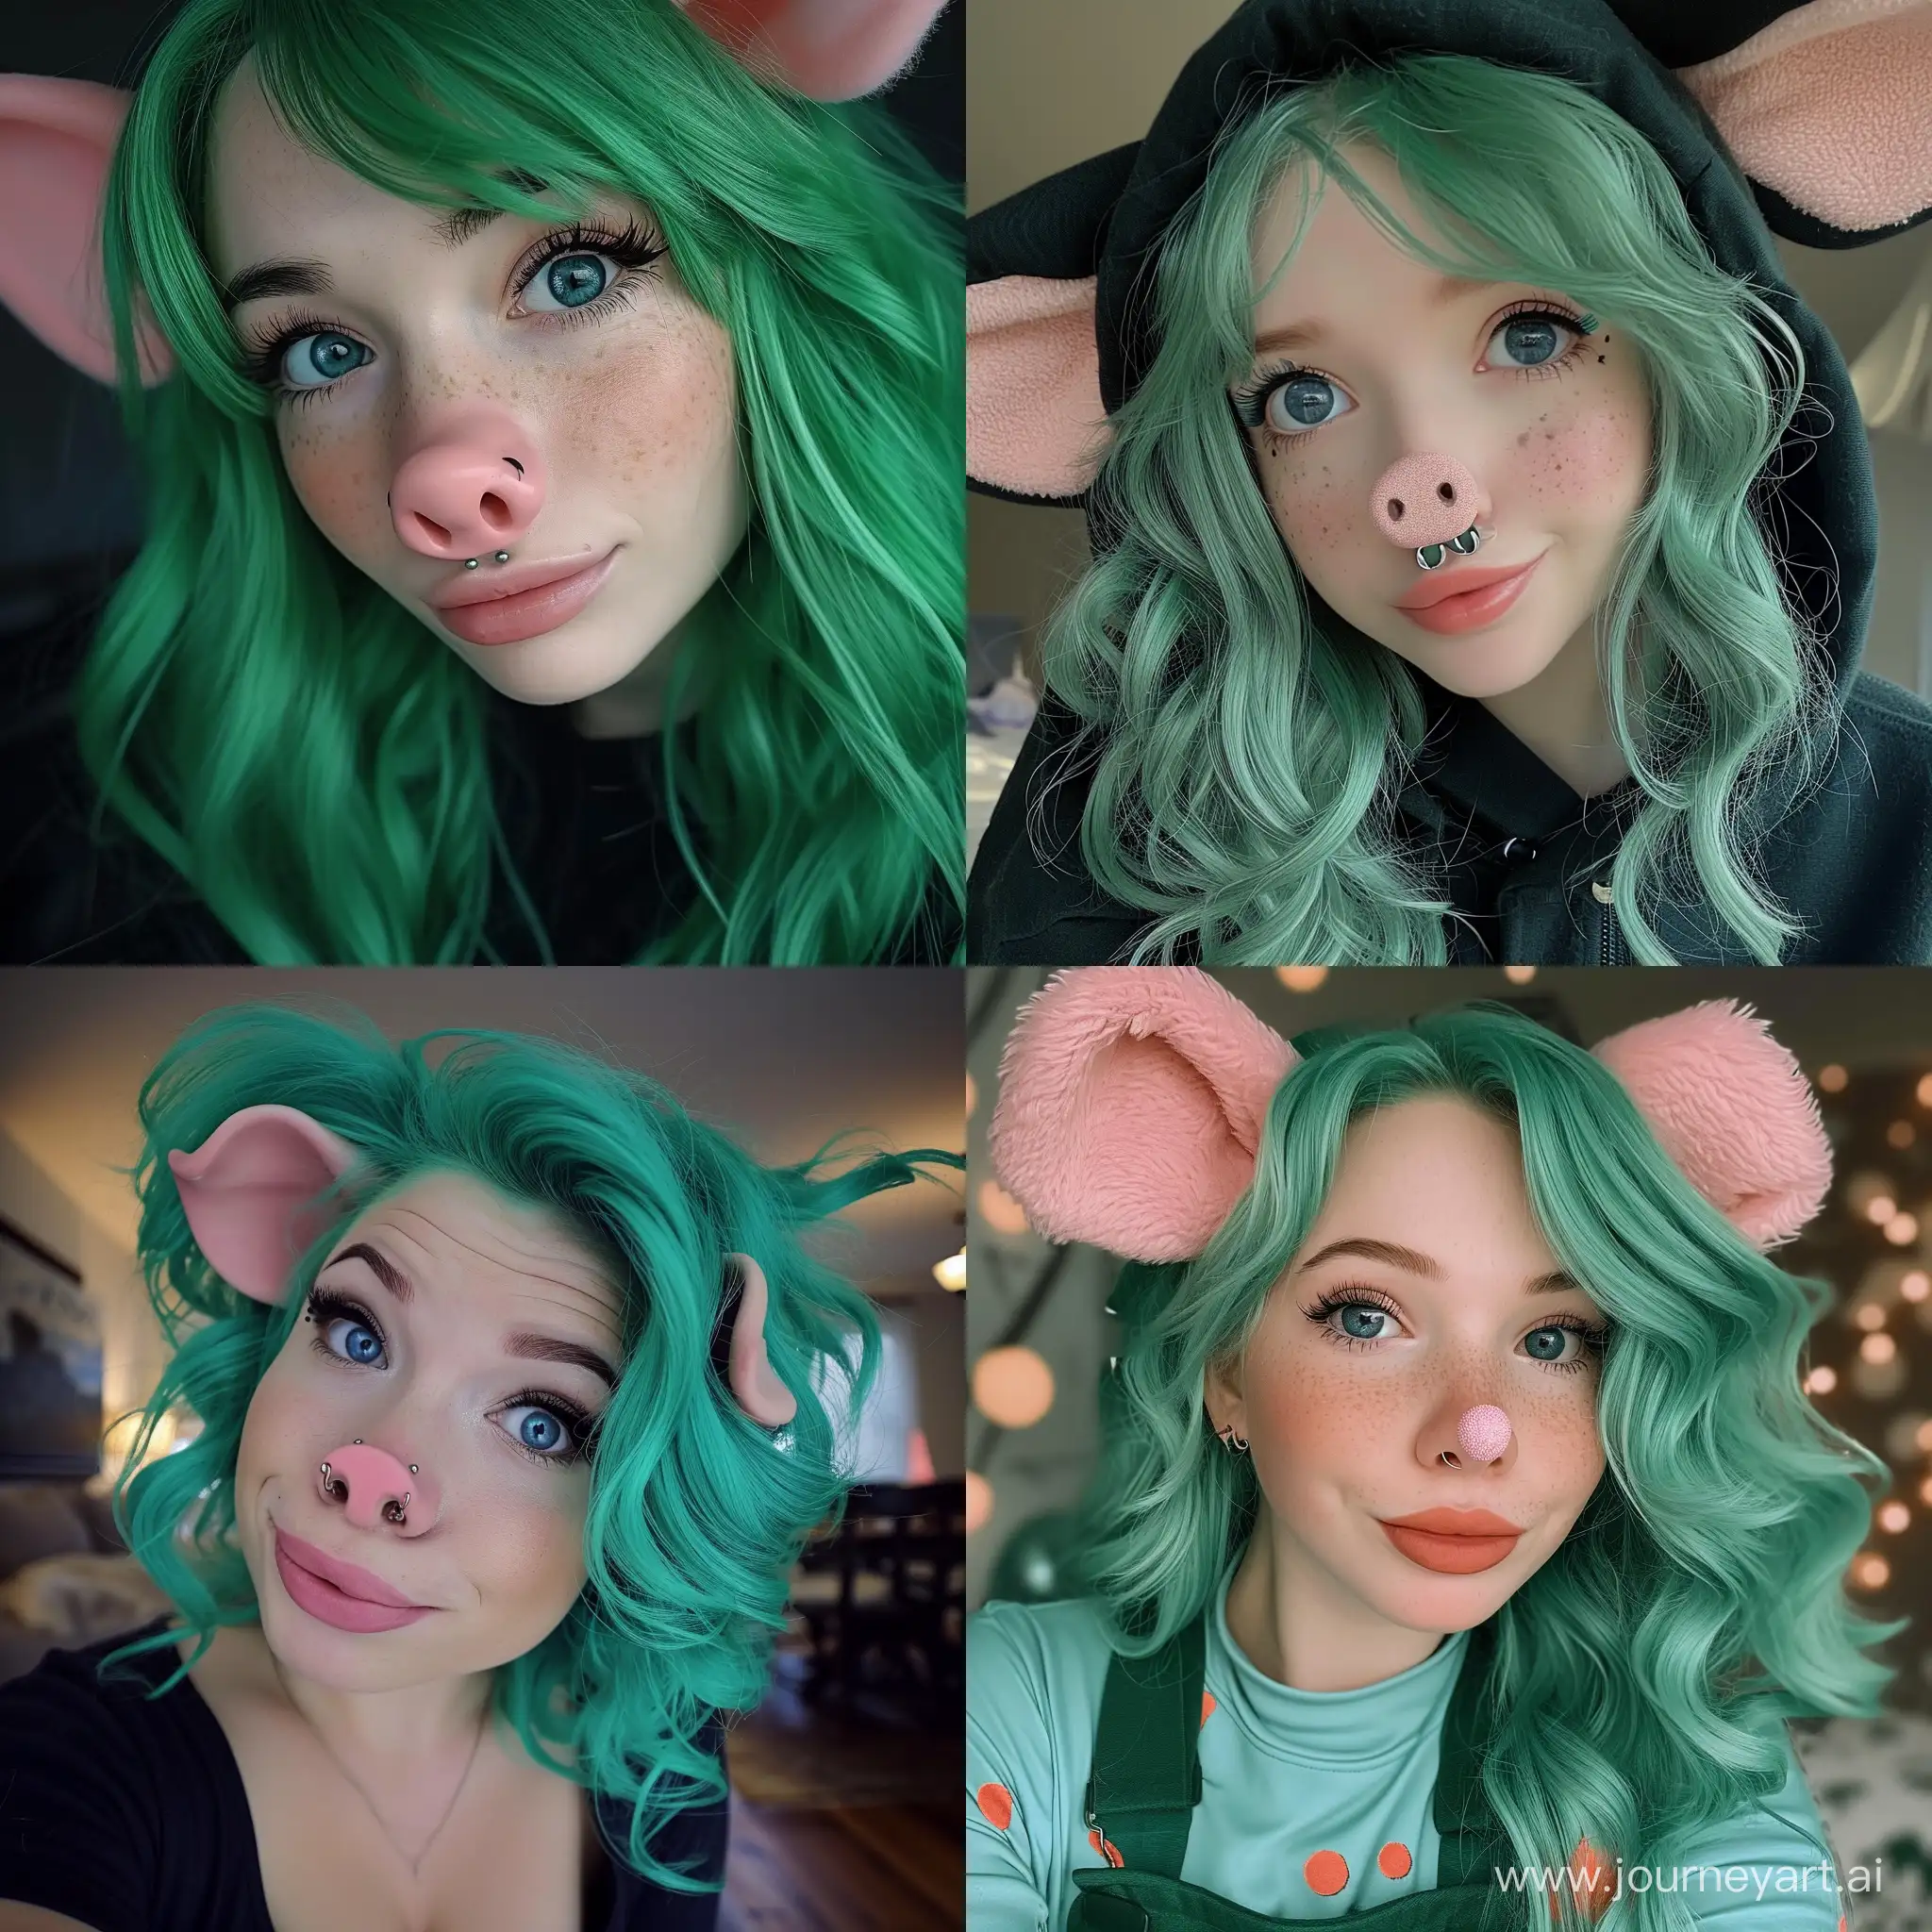 Whimsical-Portrait-of-Danyel-Giacobe-a-Funny-and-Smart-36YearOld-Female-with-Green-Hair-and-a-Cute-Pig-Nose